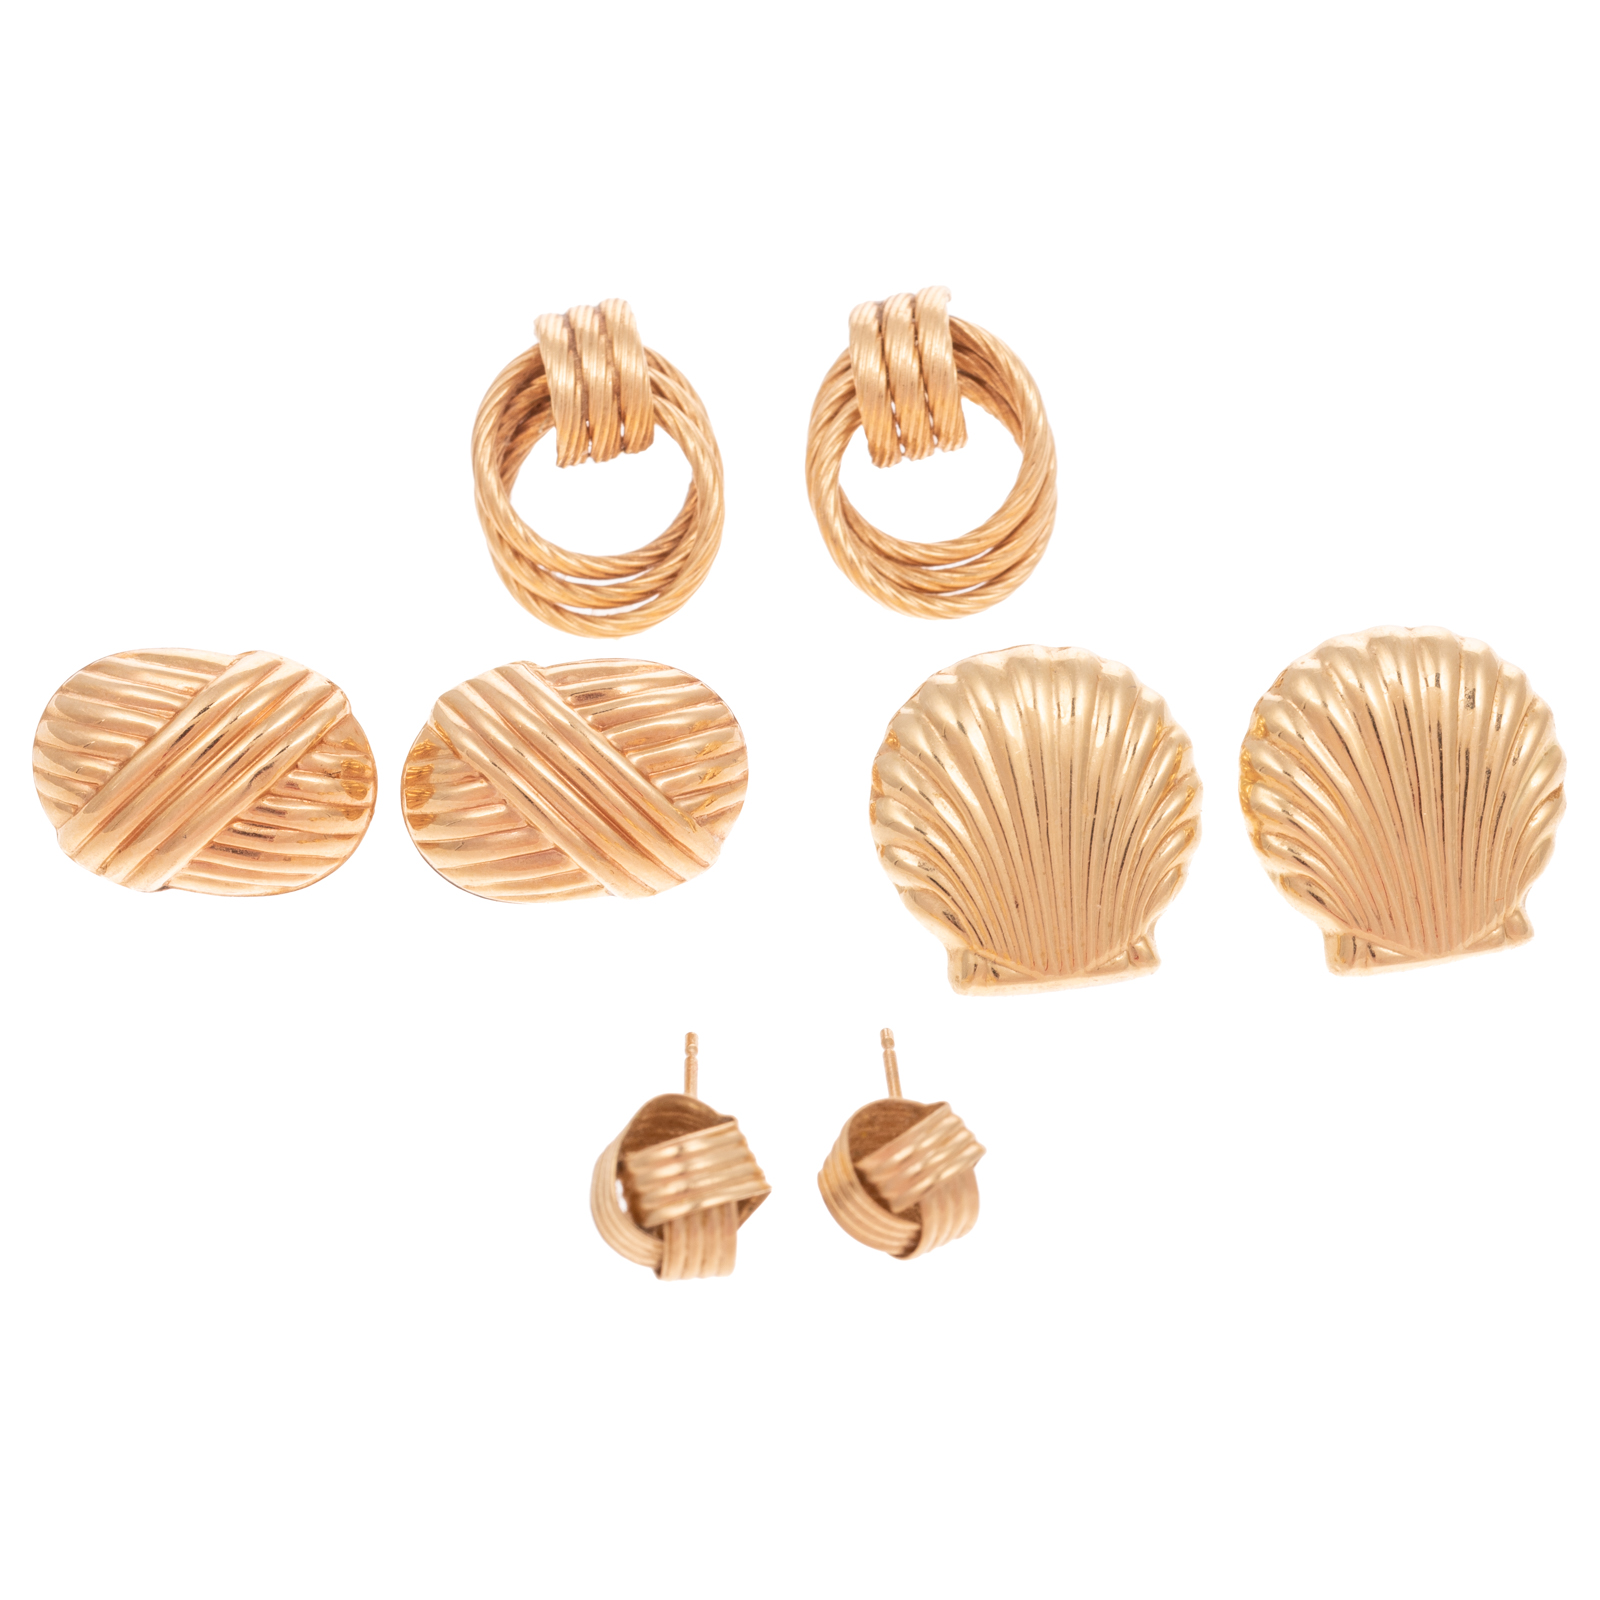 FOUR PAIRS OF 14K EARRINGS Four